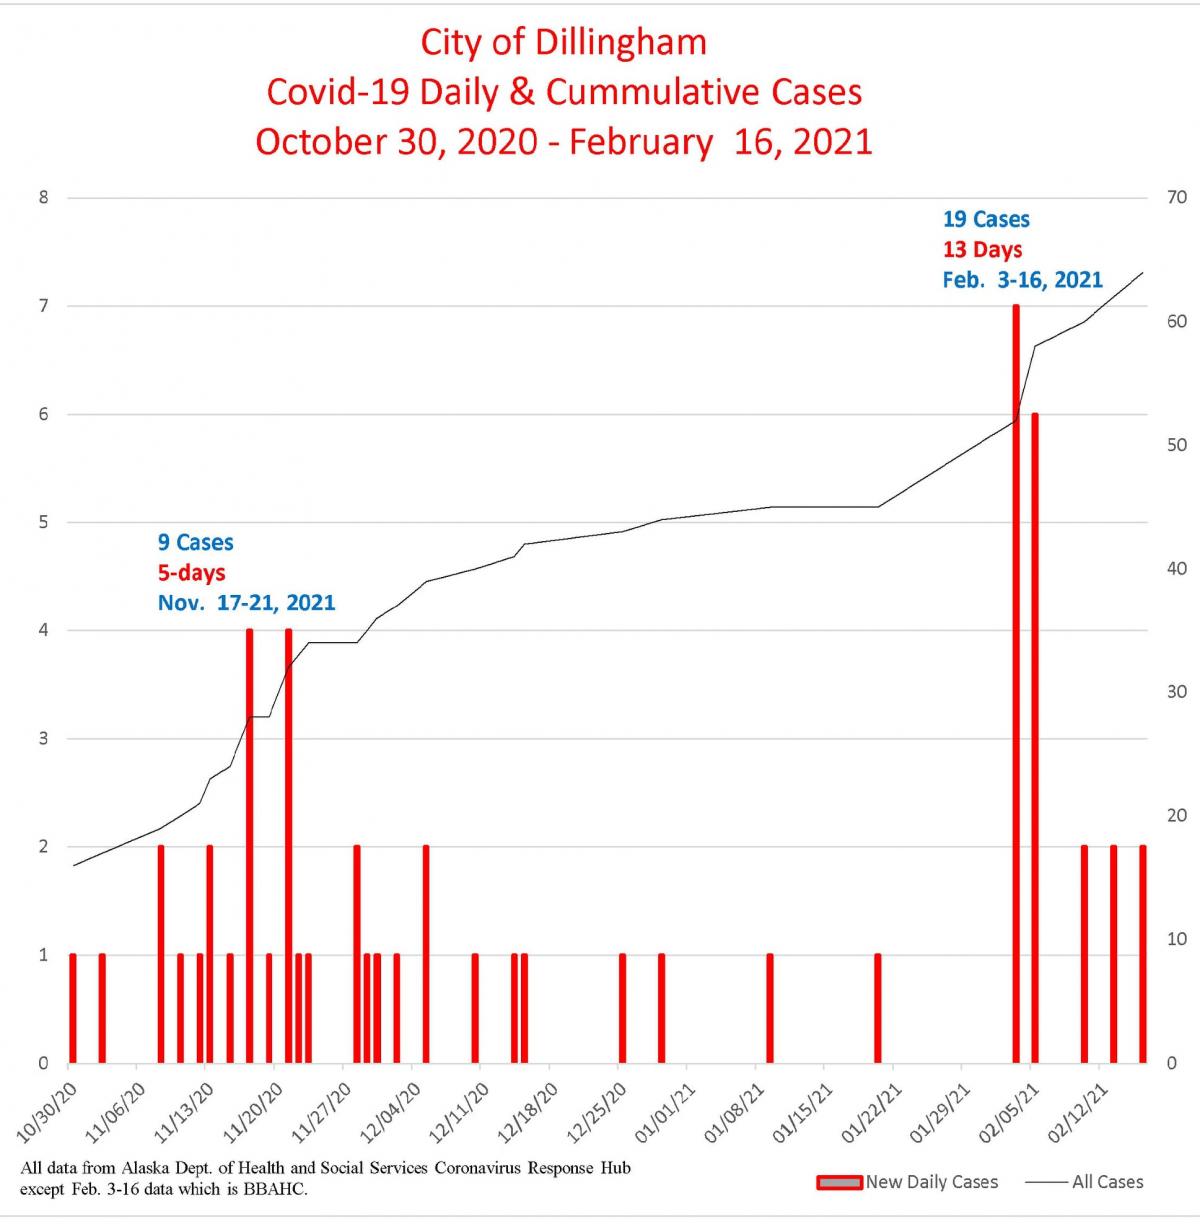 City of Dillingham Daily & Cumulative Cases October 30, 2020 - February 16, 2021 